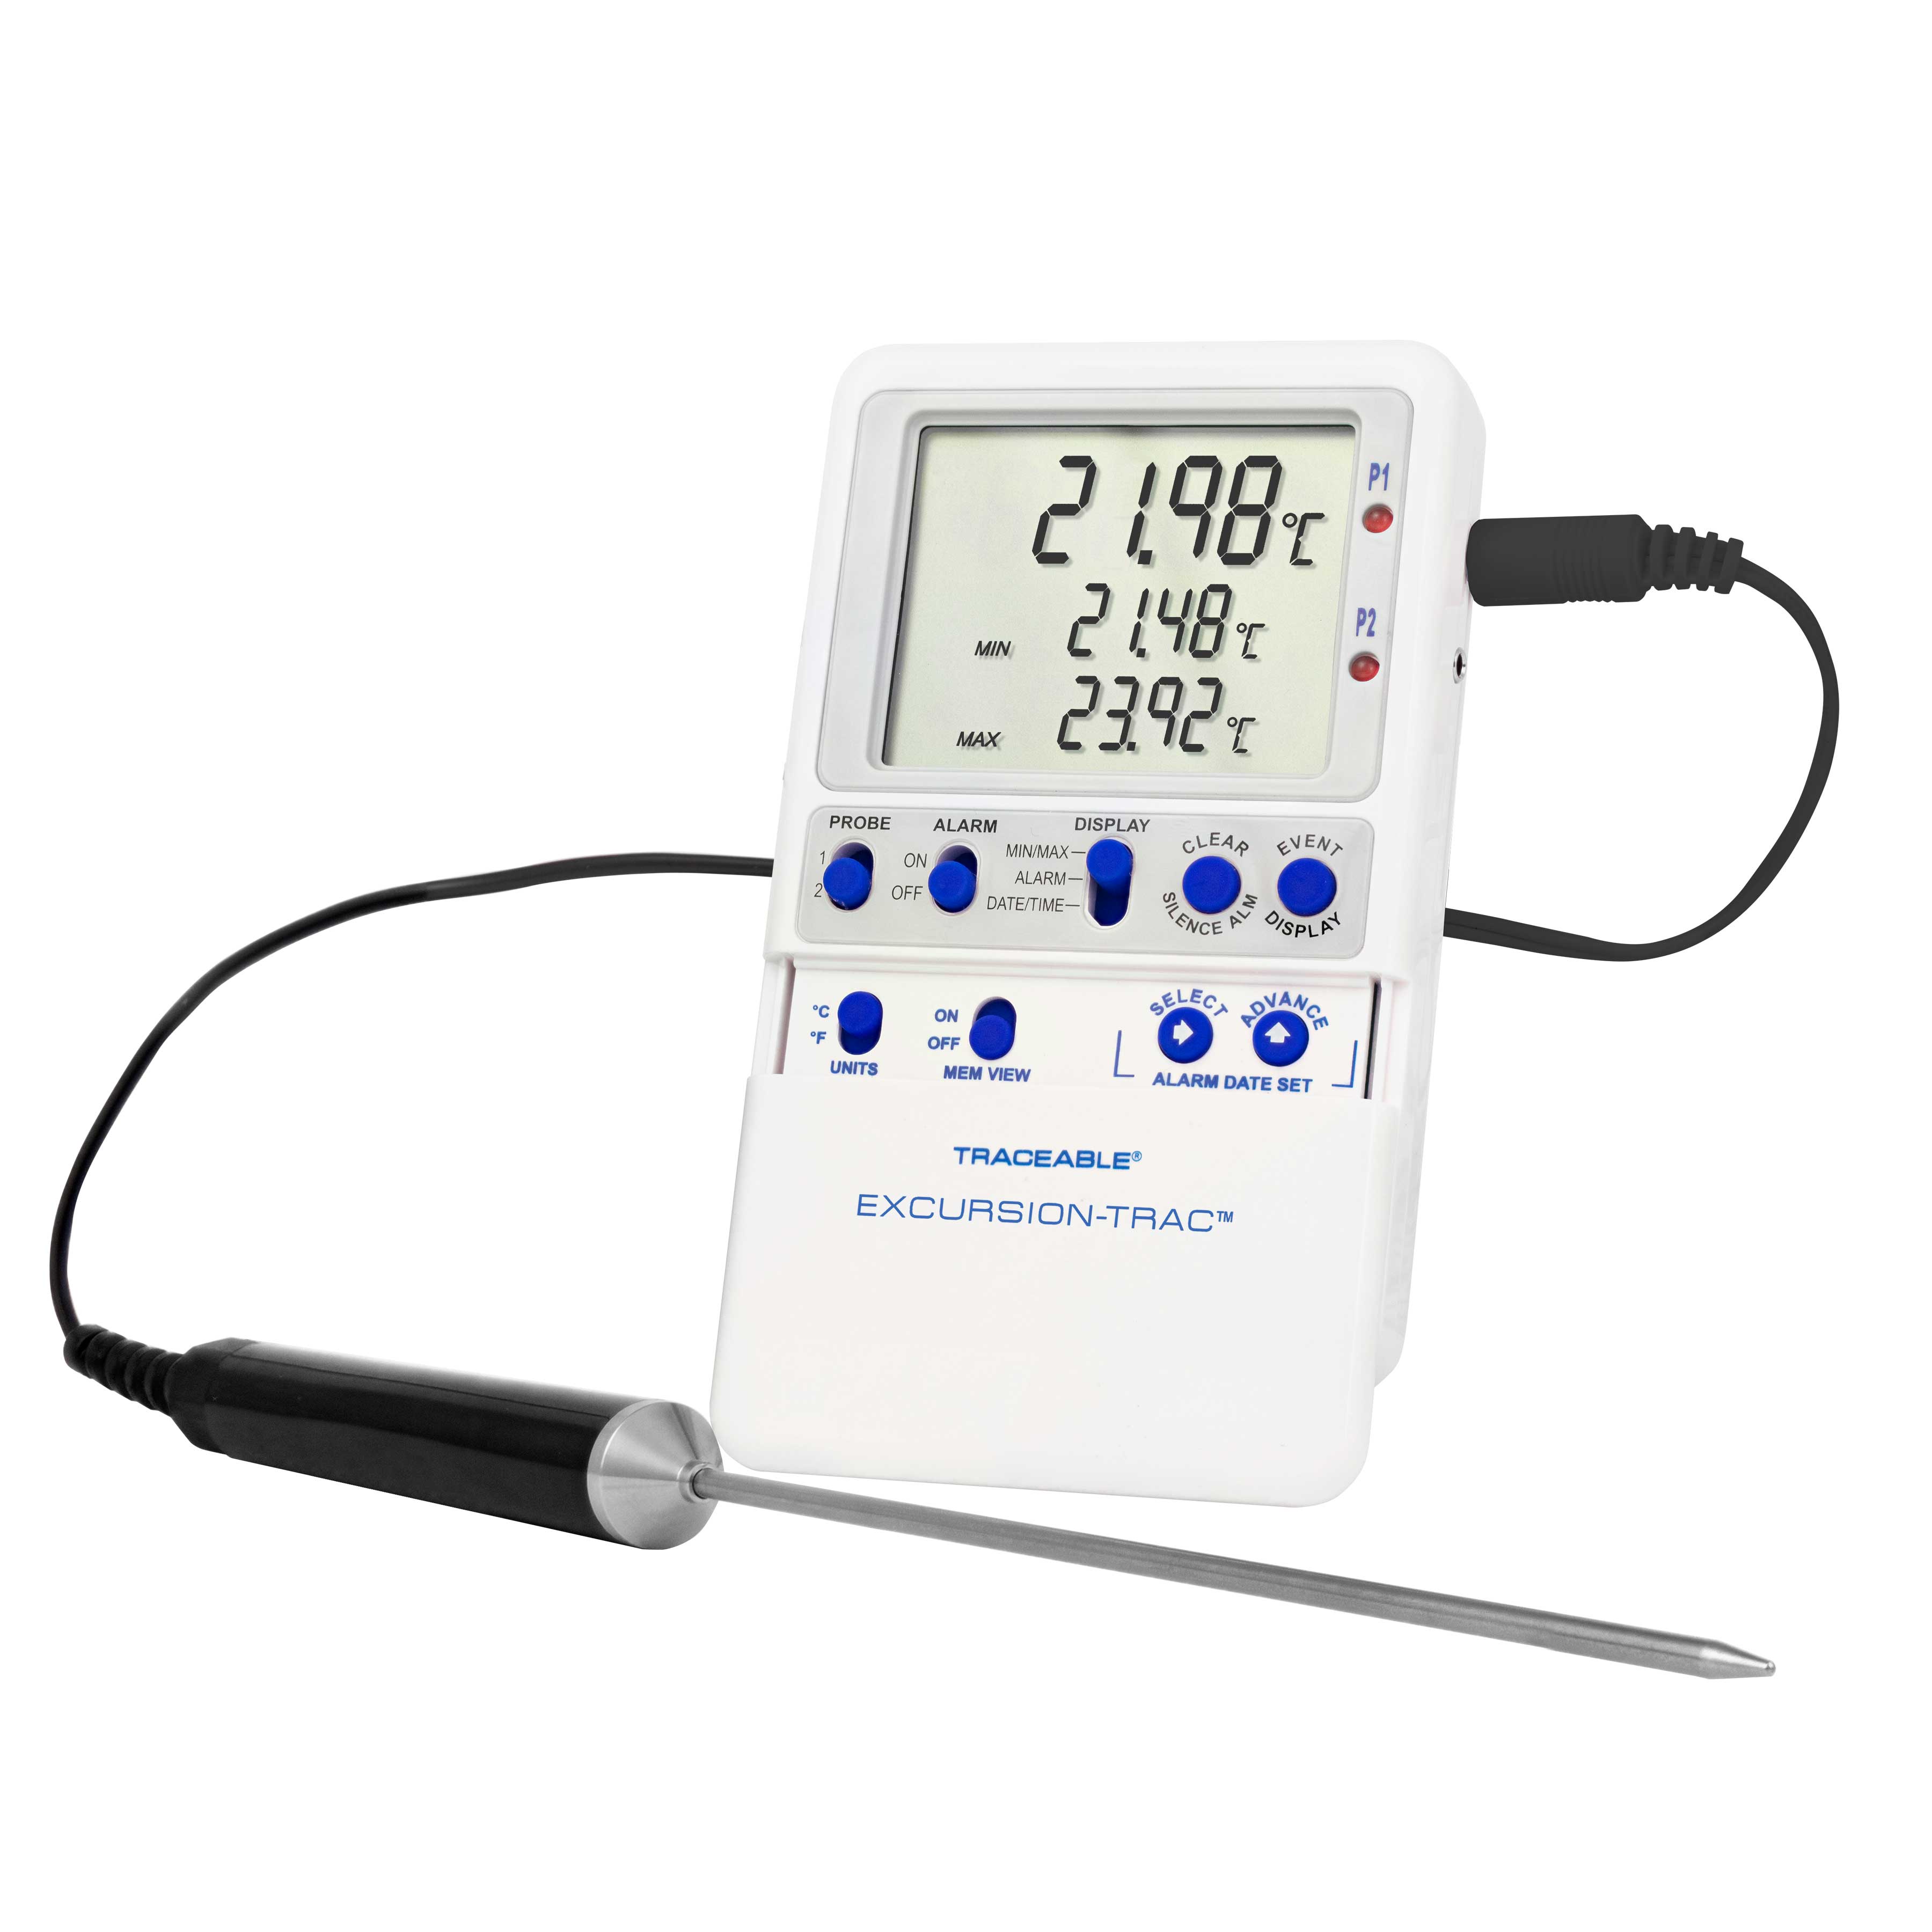 Excursion-Trac datalogging digital thermometer. TRACEABLE. Range: –50.00 to 70.00°C. Accuracy: ±0.25°C. Resolution: 0.01°C. Probes: 1 stainless-steel probe. Application: Refrigerators and Freezers